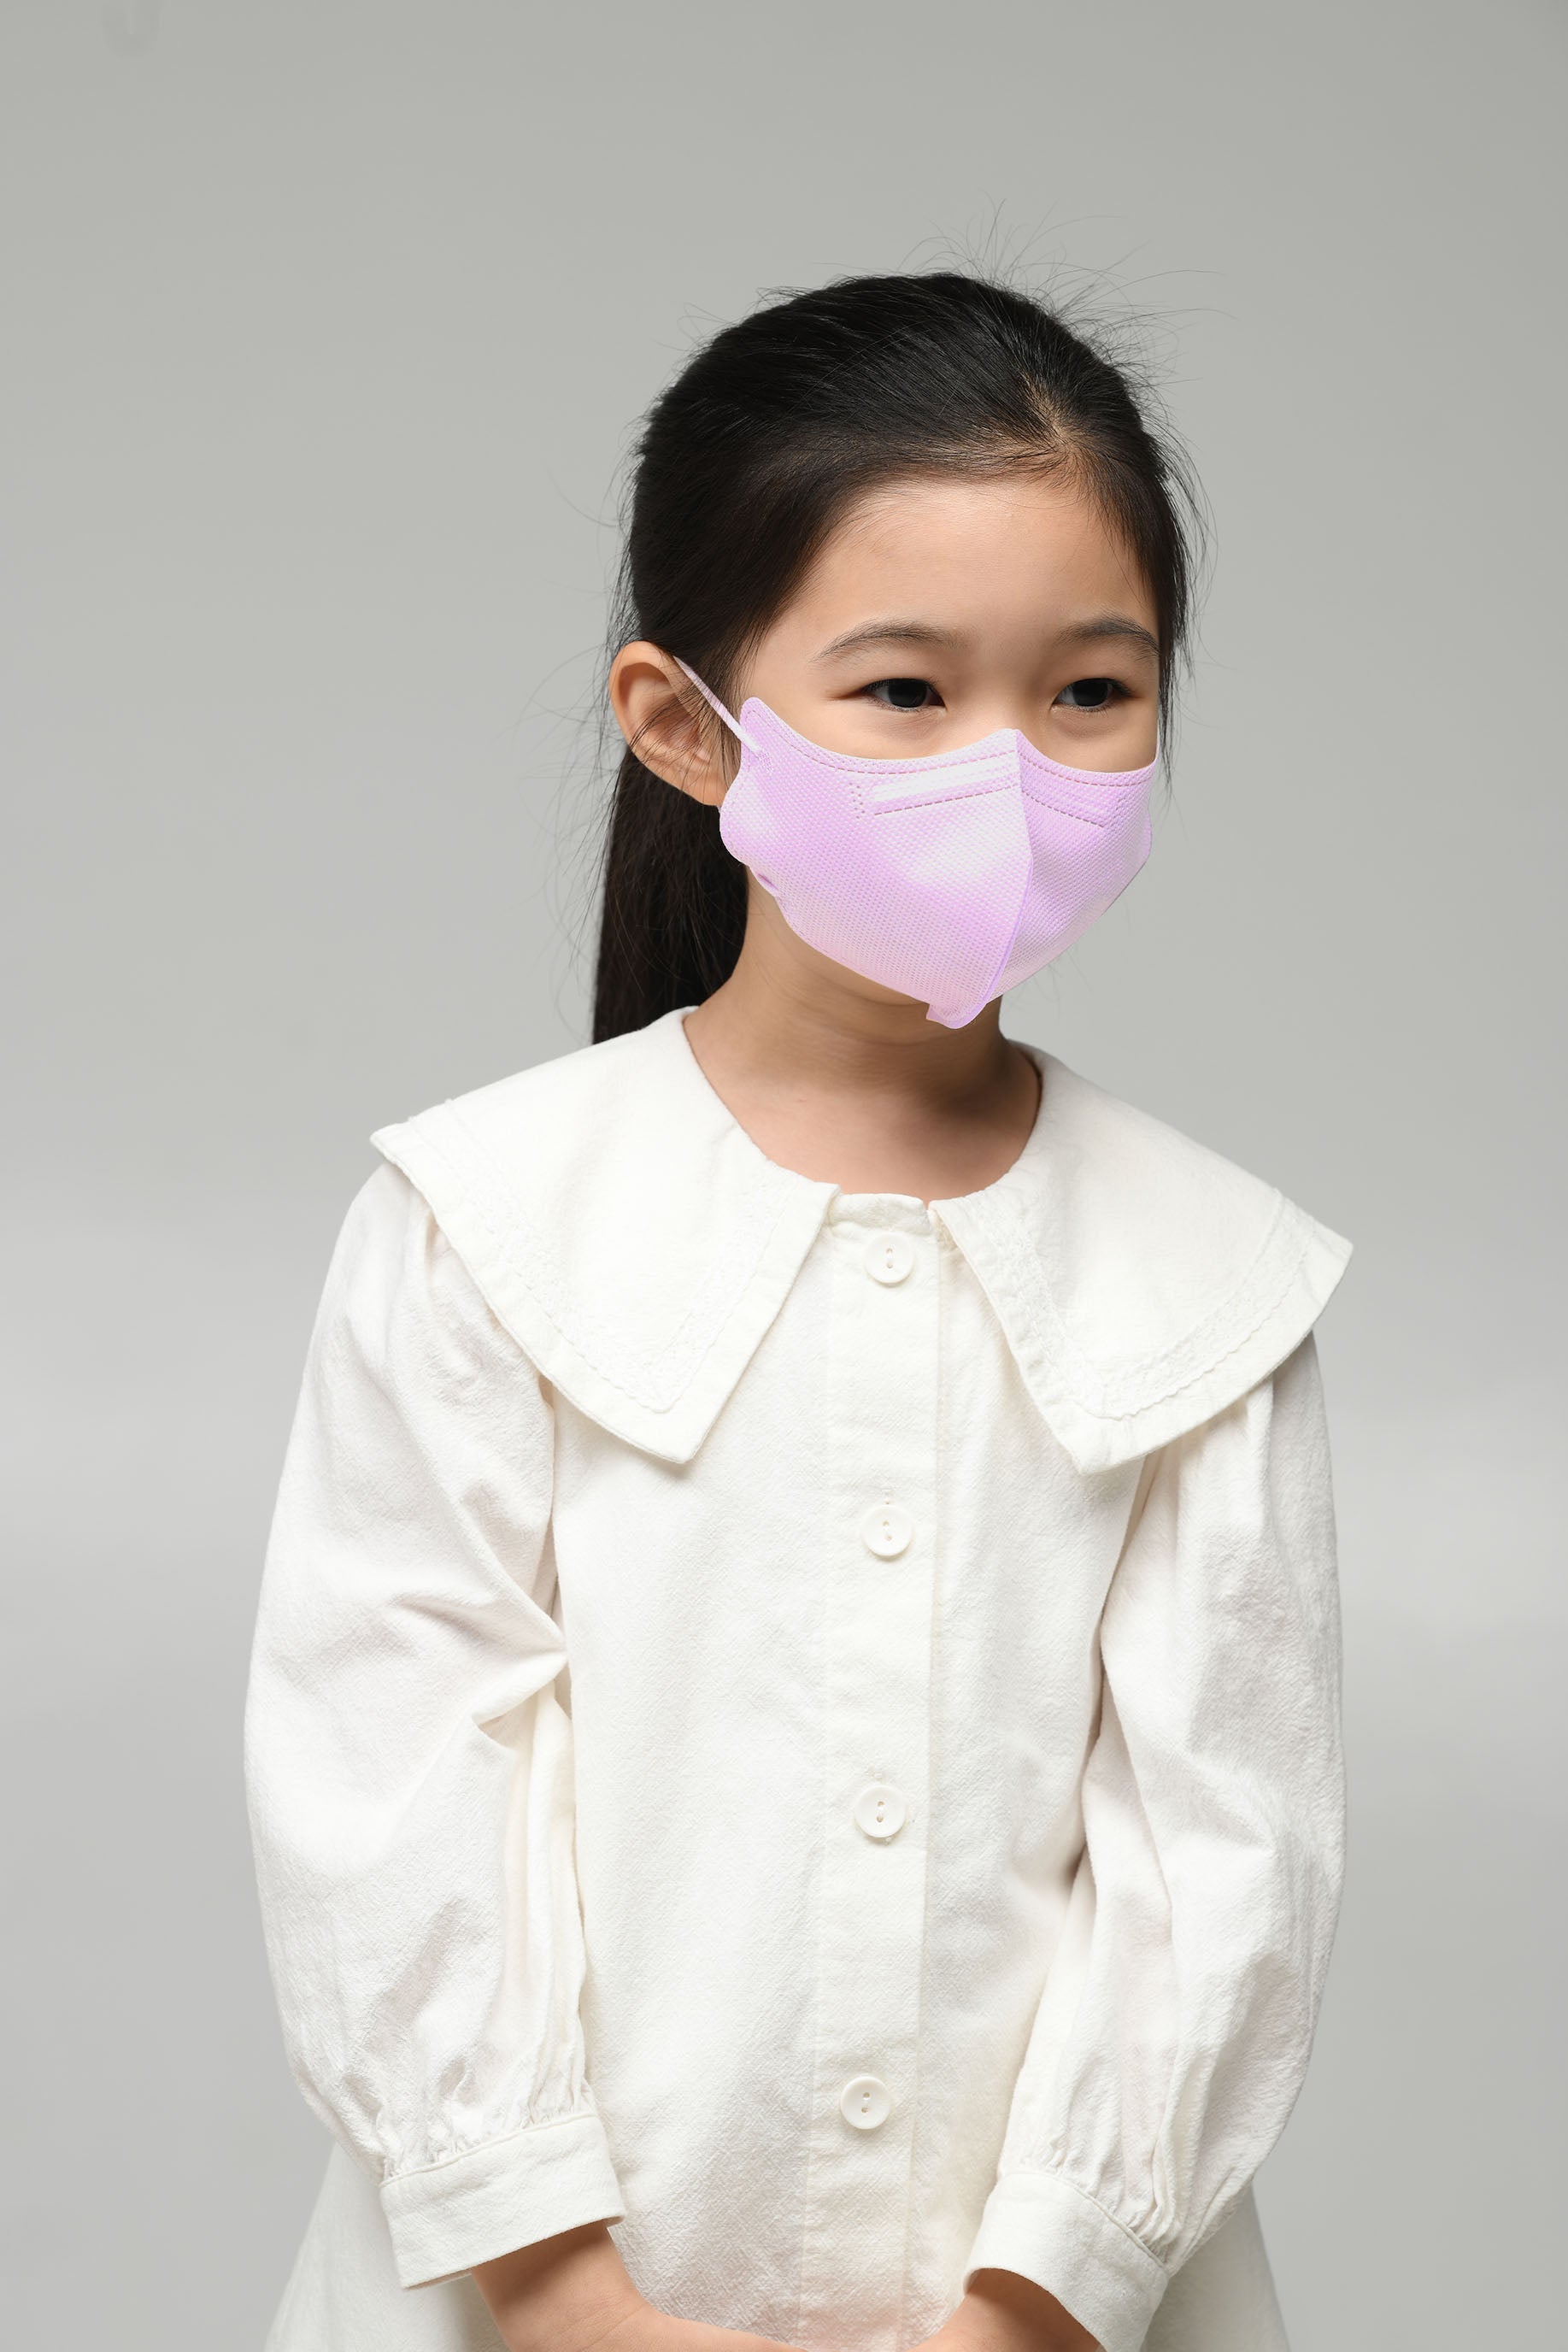 Good Manner KF94 Masks Canada for Toddlers XS, Pink, (ages 3 to 5), 25 masks./ Free Shipping within Canada-The Authorized Distributor in Canada. | Clear Pro Global_Good Manner